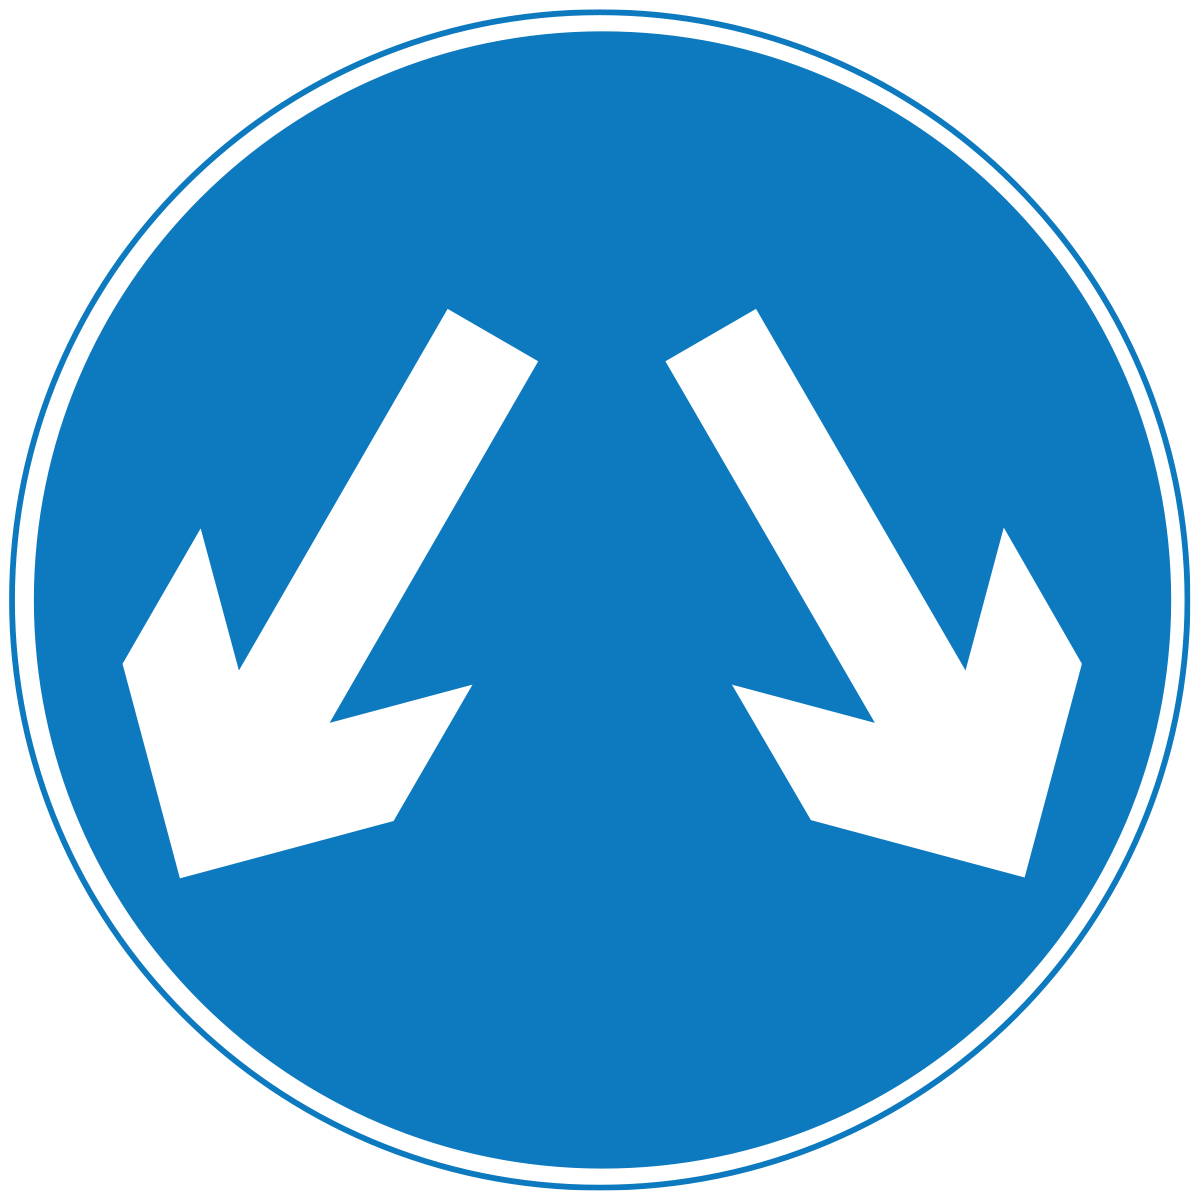 Split-way, i.e. motorists can pass to either side, but either side might not reach the same destination